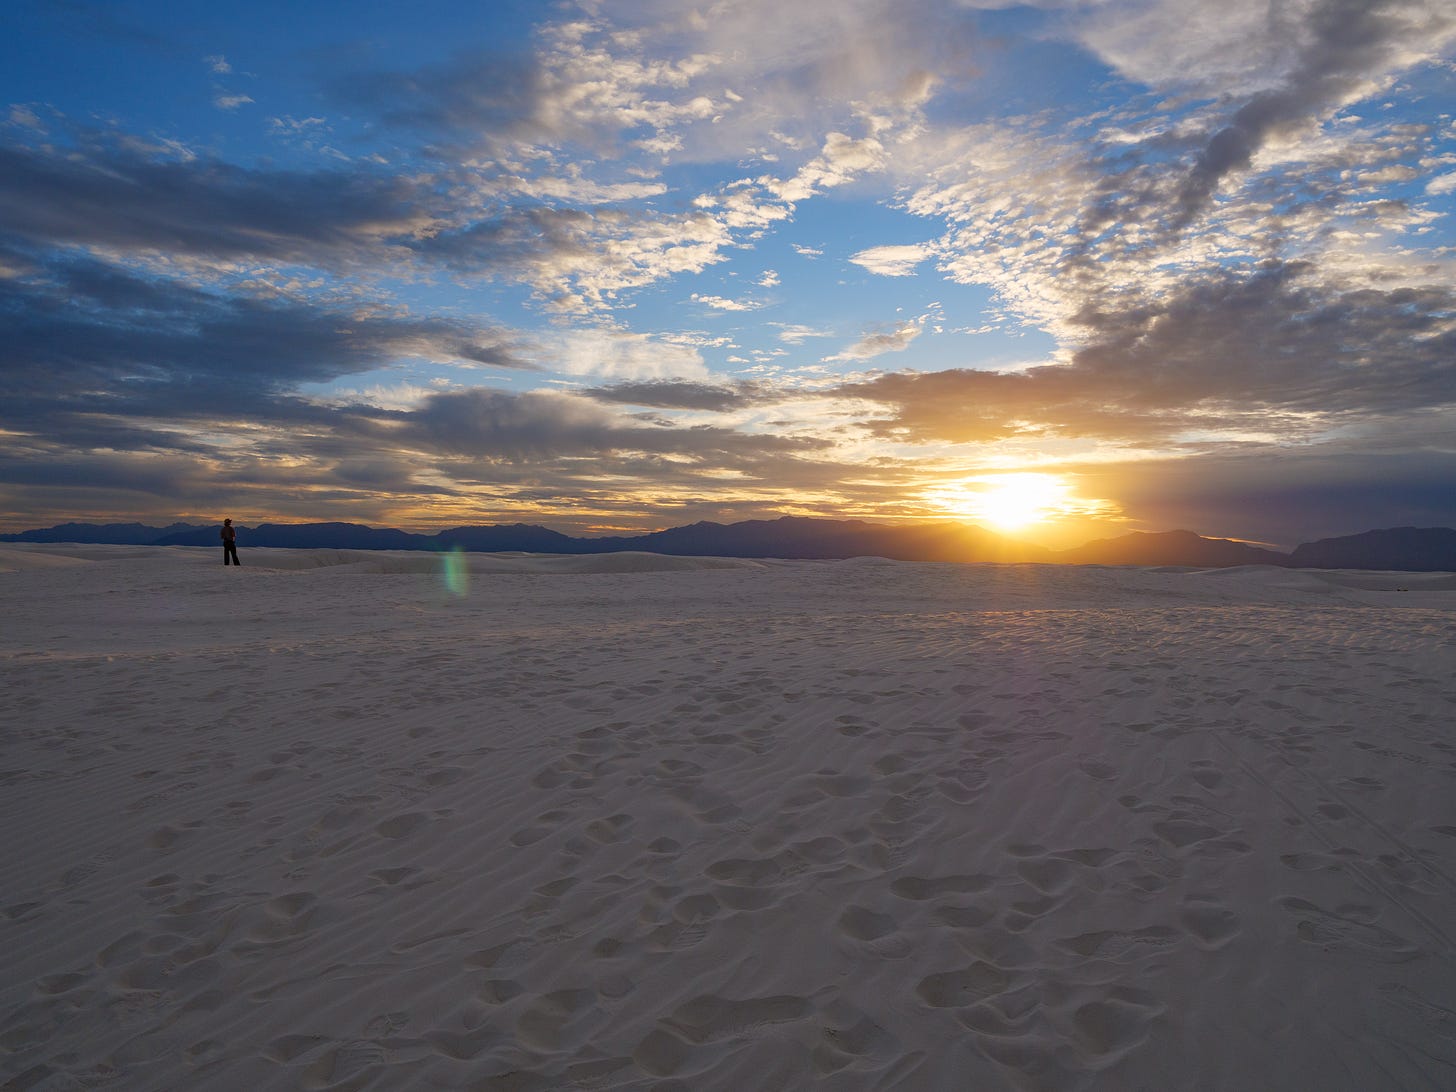 A wide view of White Sands National Monument. White powdery sand fills the lower half of the photo. In the sand you can see contours and striations created by the winds and the footsteps of visitors. On the left, near the edge of the visible sand, stands a solitary figure, a park ranger. They are looking towards the distant mountains in the background. They are purple and jagged. Just above them, a bright, golden sun is setting in a blue sky interspersed with clouds at different altitudes. The low clouds are deep grey, their edges tinged with rays of the sun. Higher up, the clouds are white.  A sliver of the sand is touched by the sunlight and is colored golden. A small green lens flare (an optical distortion caused by pointing the camera at the sun) floats near the park ranger." title="A wide view of White Sands National Monument. White powdery sand fills the lower half of the photo. In the sand you can see contours and striations created by the winds and the footsteps of visitors. On the left, near the edge of the visible sand, stands a solitary figure, a park ranger. They are looking towards the distant mountains in the background. They are purple and jagged. Just above them, a bright, golden sun is setting in a blue sky interspersed with clouds at different altitudes. The low clouds are deep grey, their edges tinged with rays of the sun. Higher up, the clouds are white.  A sliver of the sand is touched by the sunlight and is colored golden. A small green lens flare (an optical distortion caused by pointing the camera at the sun) floats near the park ranger.